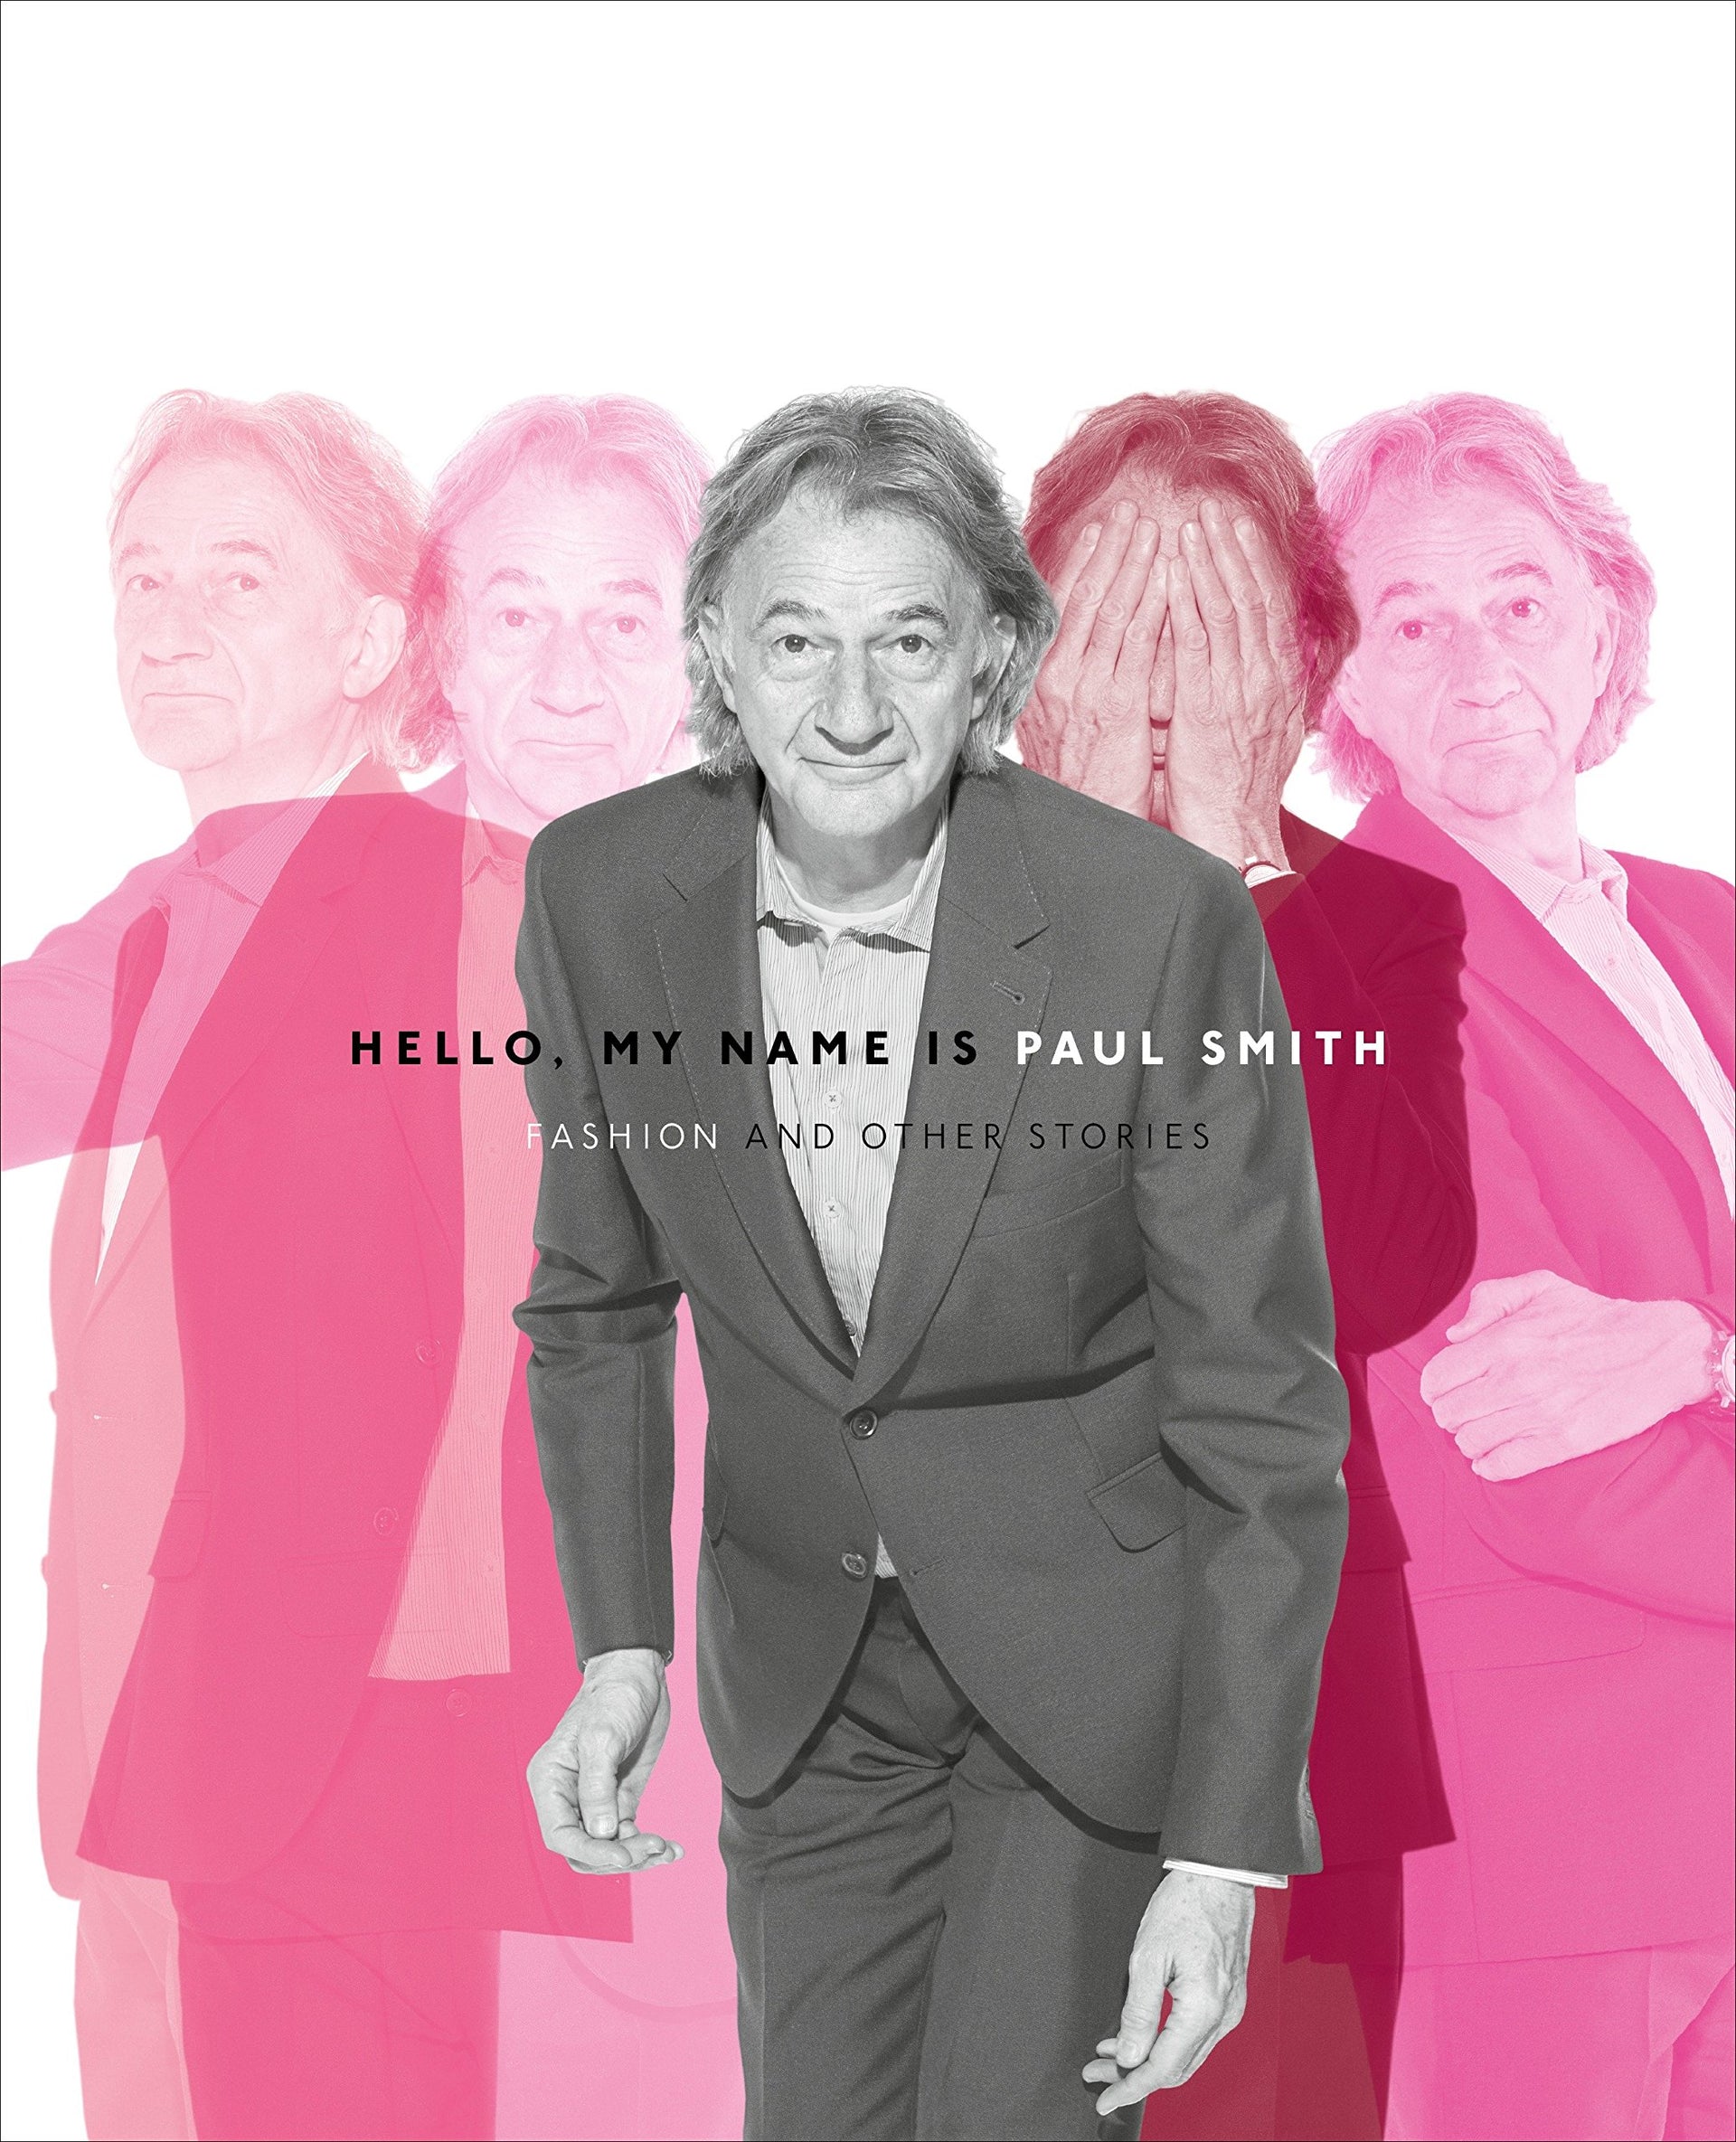 Hello, My Name is Paul Smith: Fashion and Other Stories